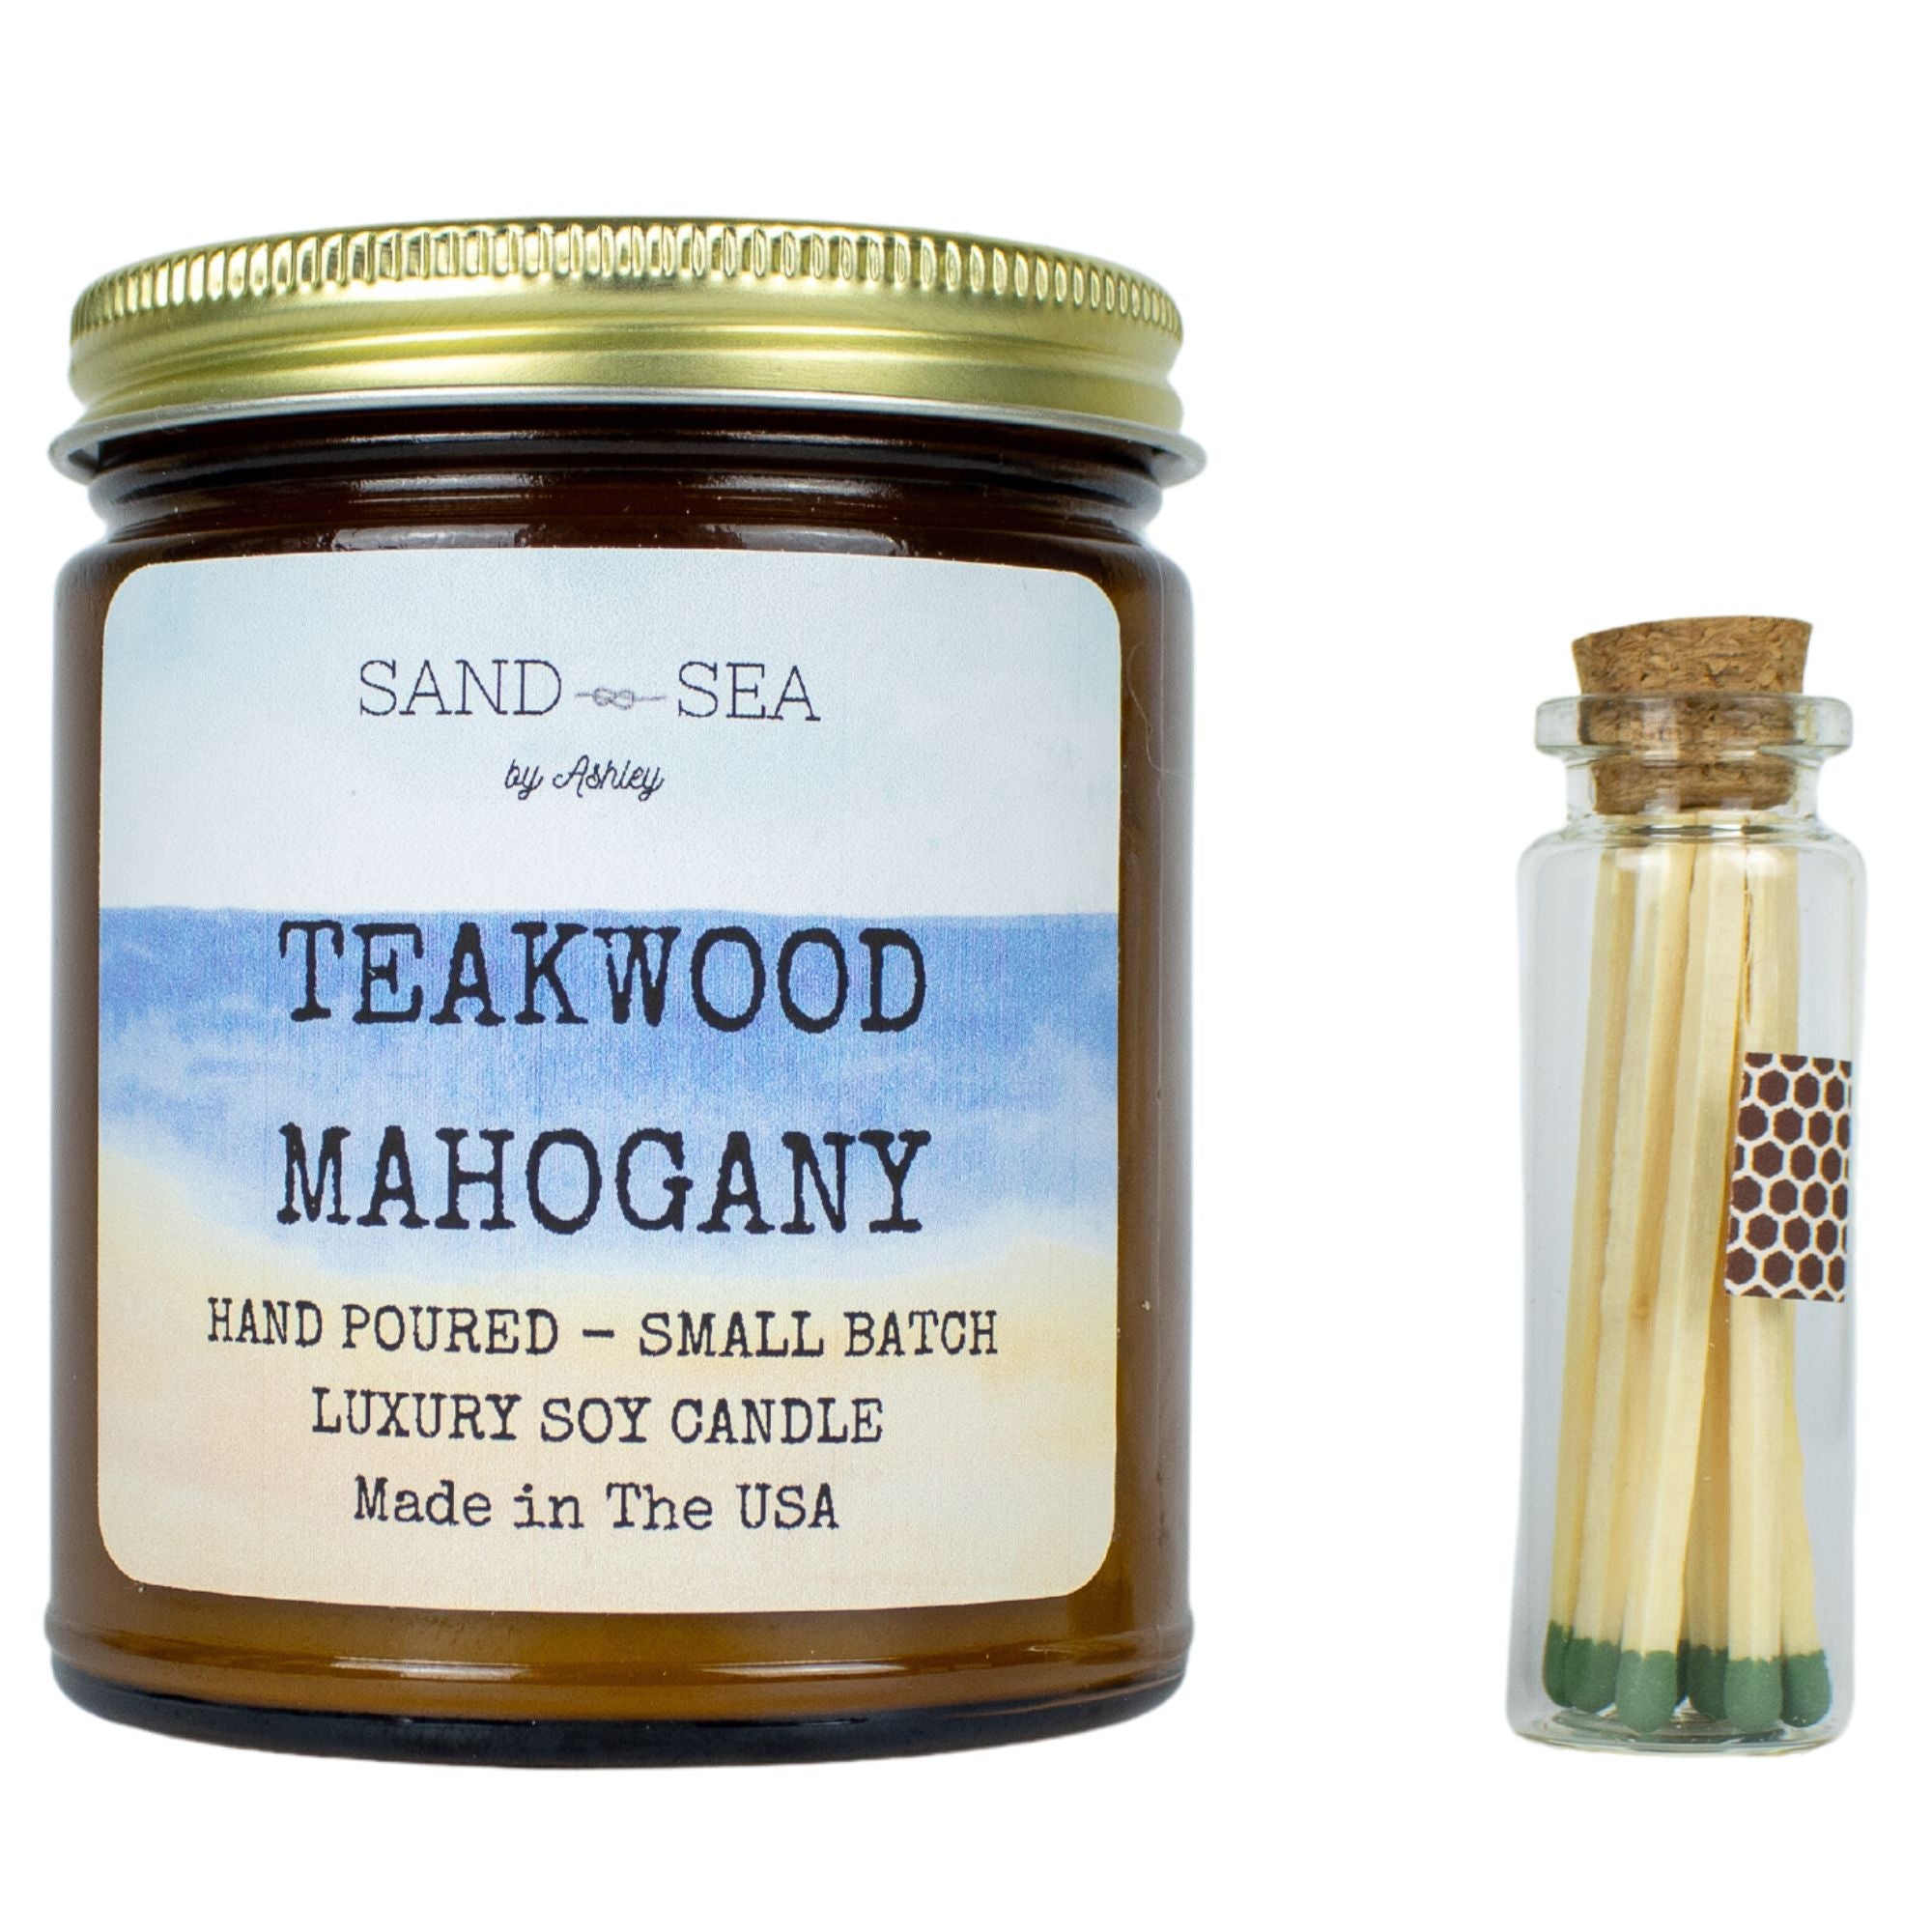 Mahogany Teakwood Soy Wax Candle Hand-poured Small Batches Scented